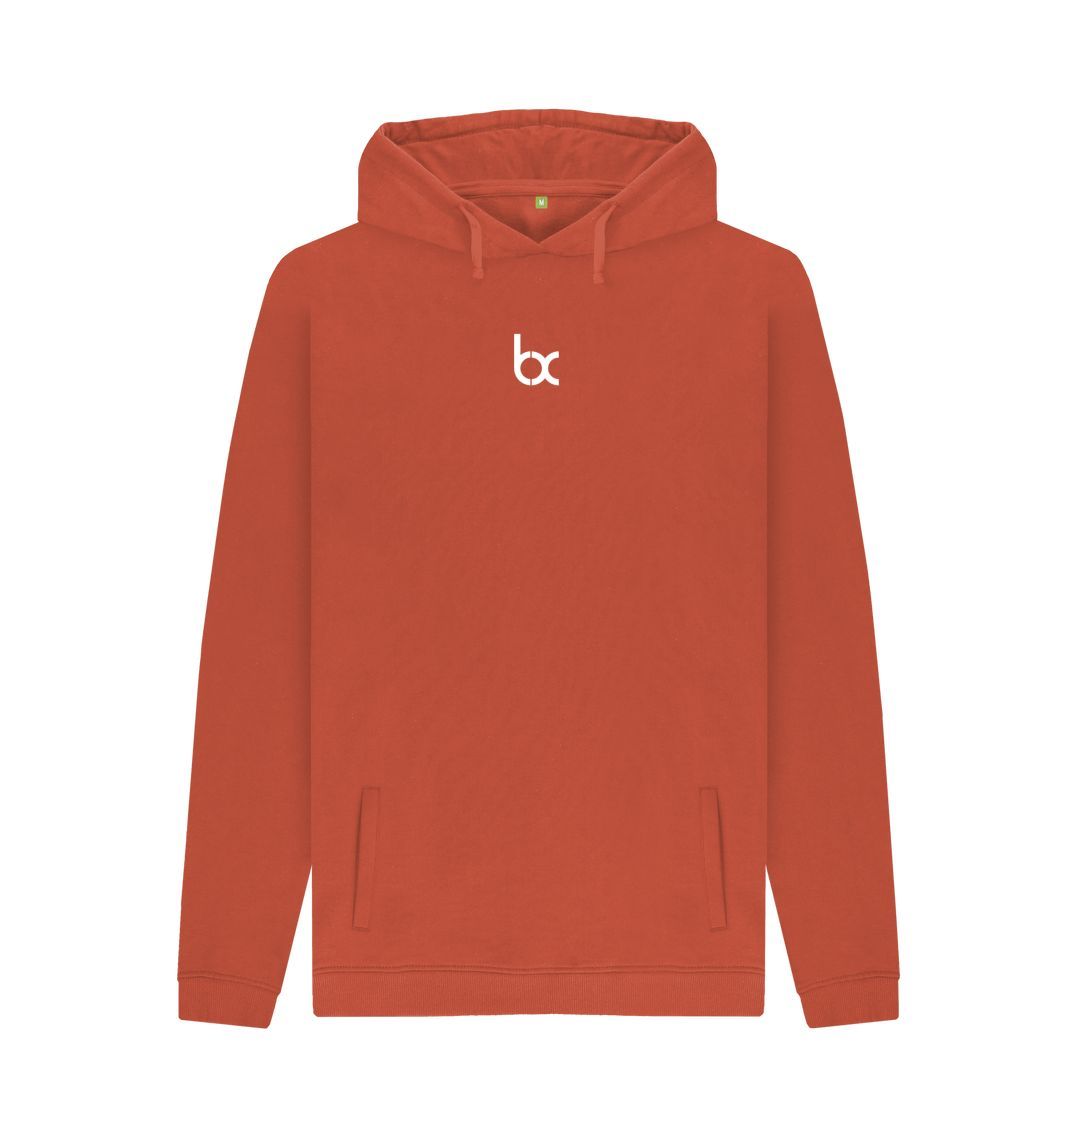 Rust BX Hoodie - with white logo